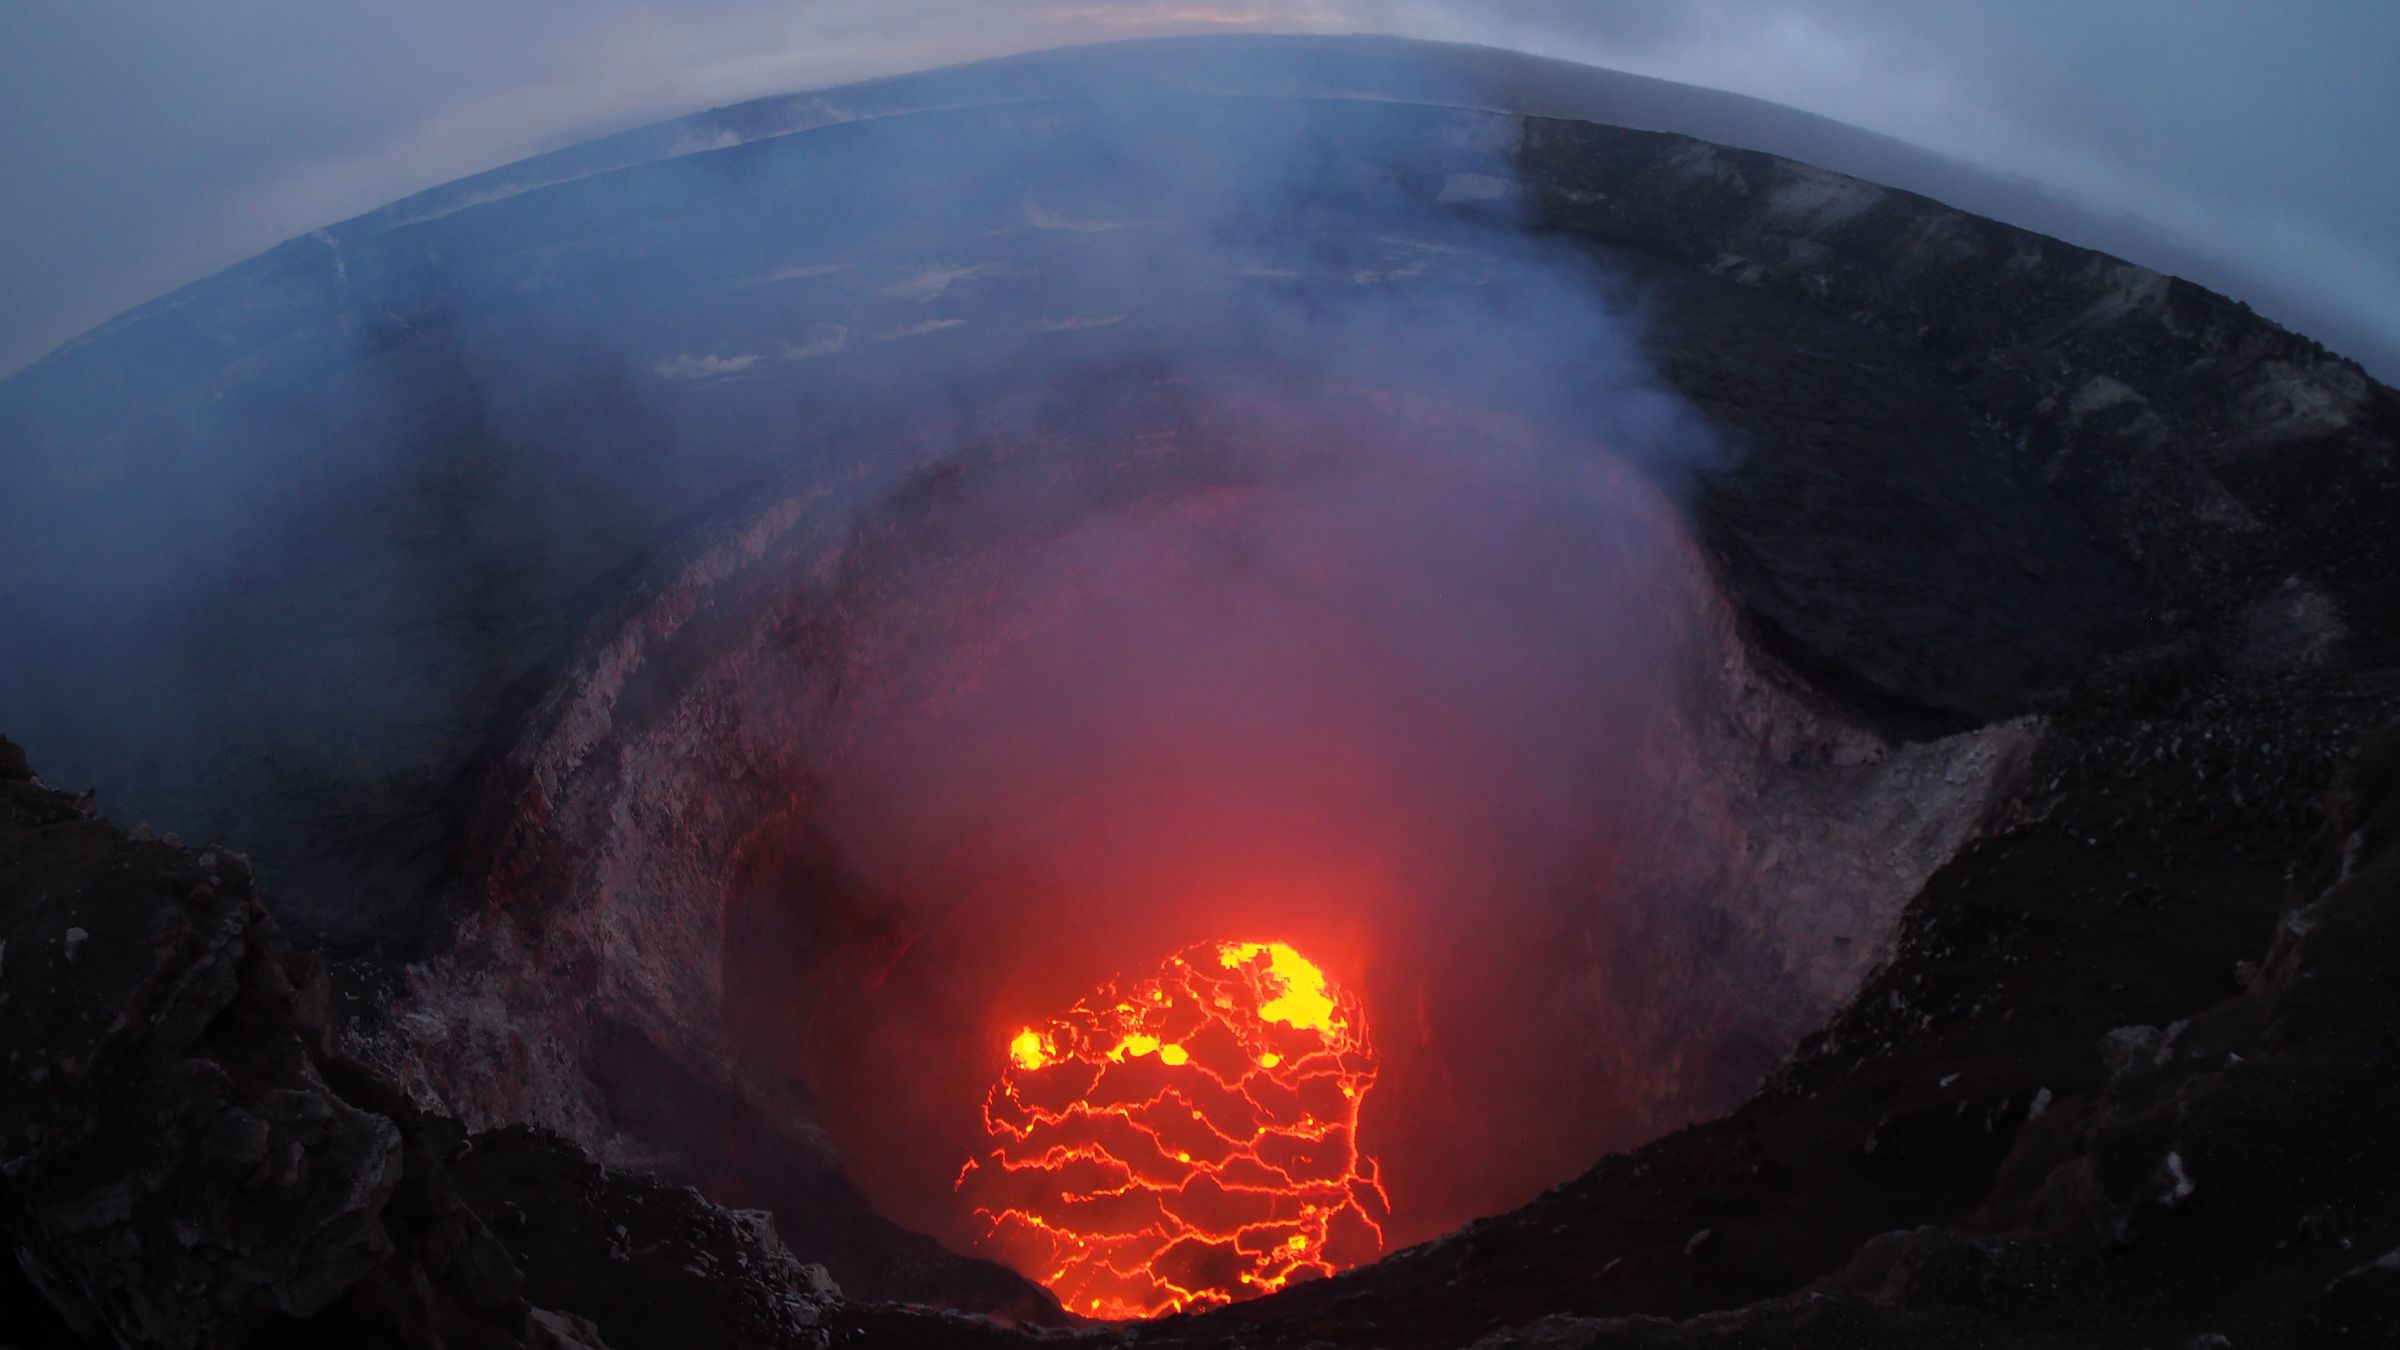 The summit lava lake in one of Kilauea’s craters has dropped significantly over the past few days, about 721 feet (220 meters) below the crater’s rim.